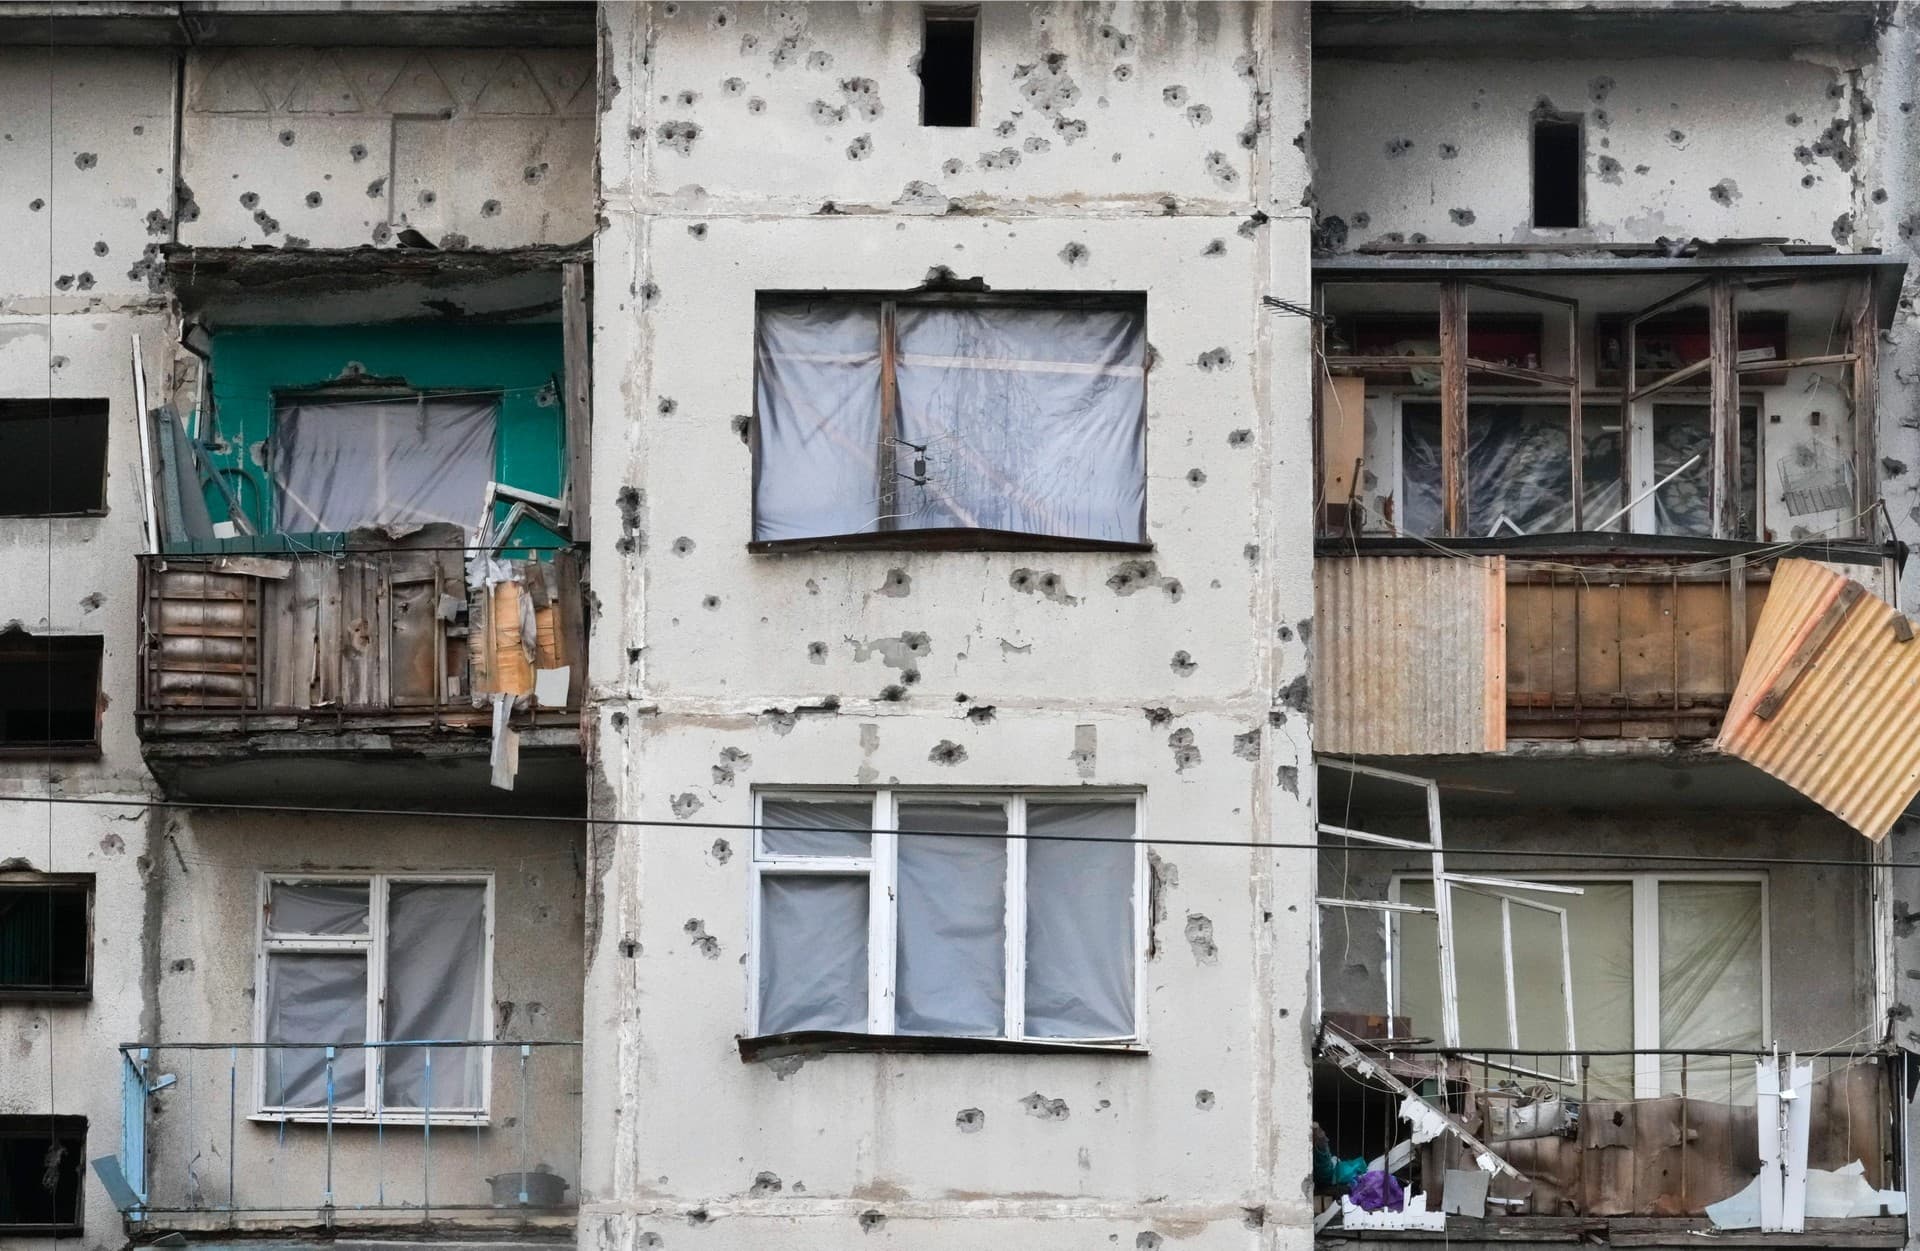 Traces of shrapnel from the Russian rockets cover a multi storey house in central Slavyansk